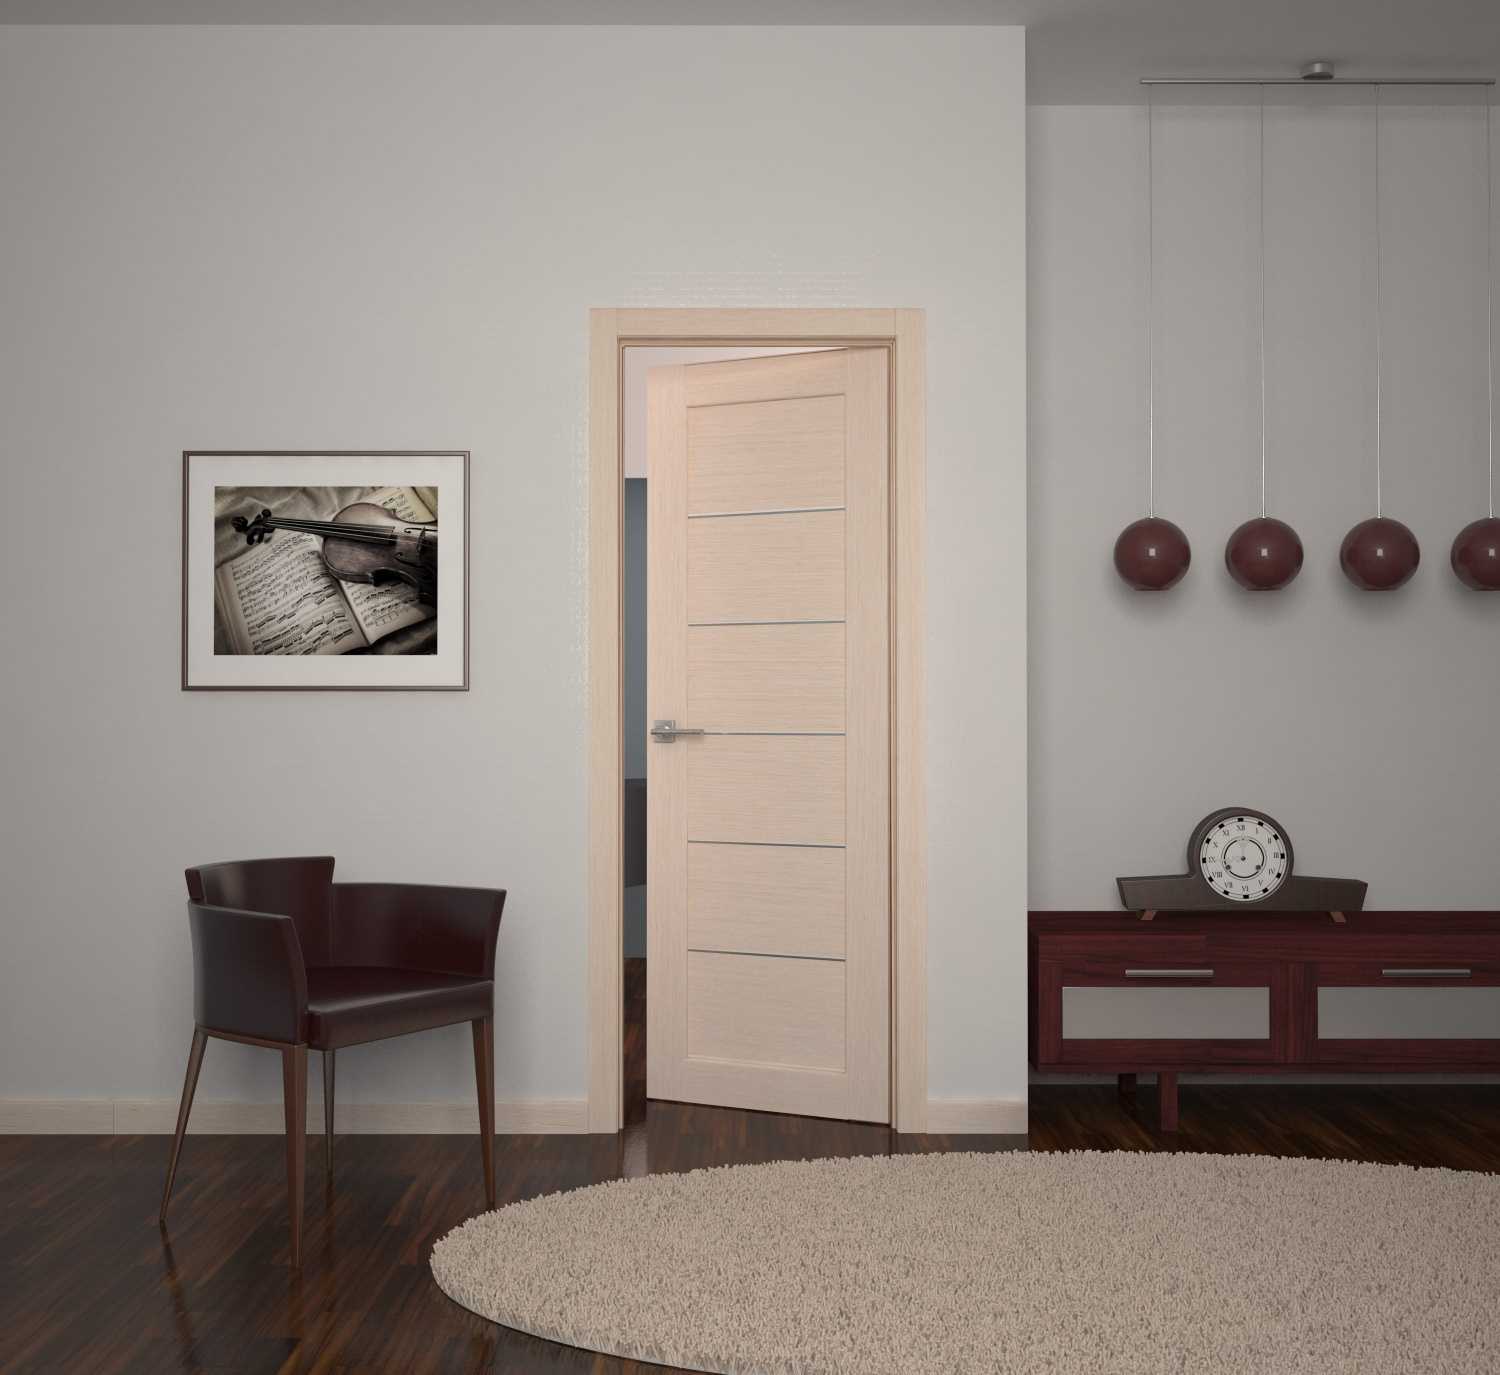 wooden doors in the style of the apartment